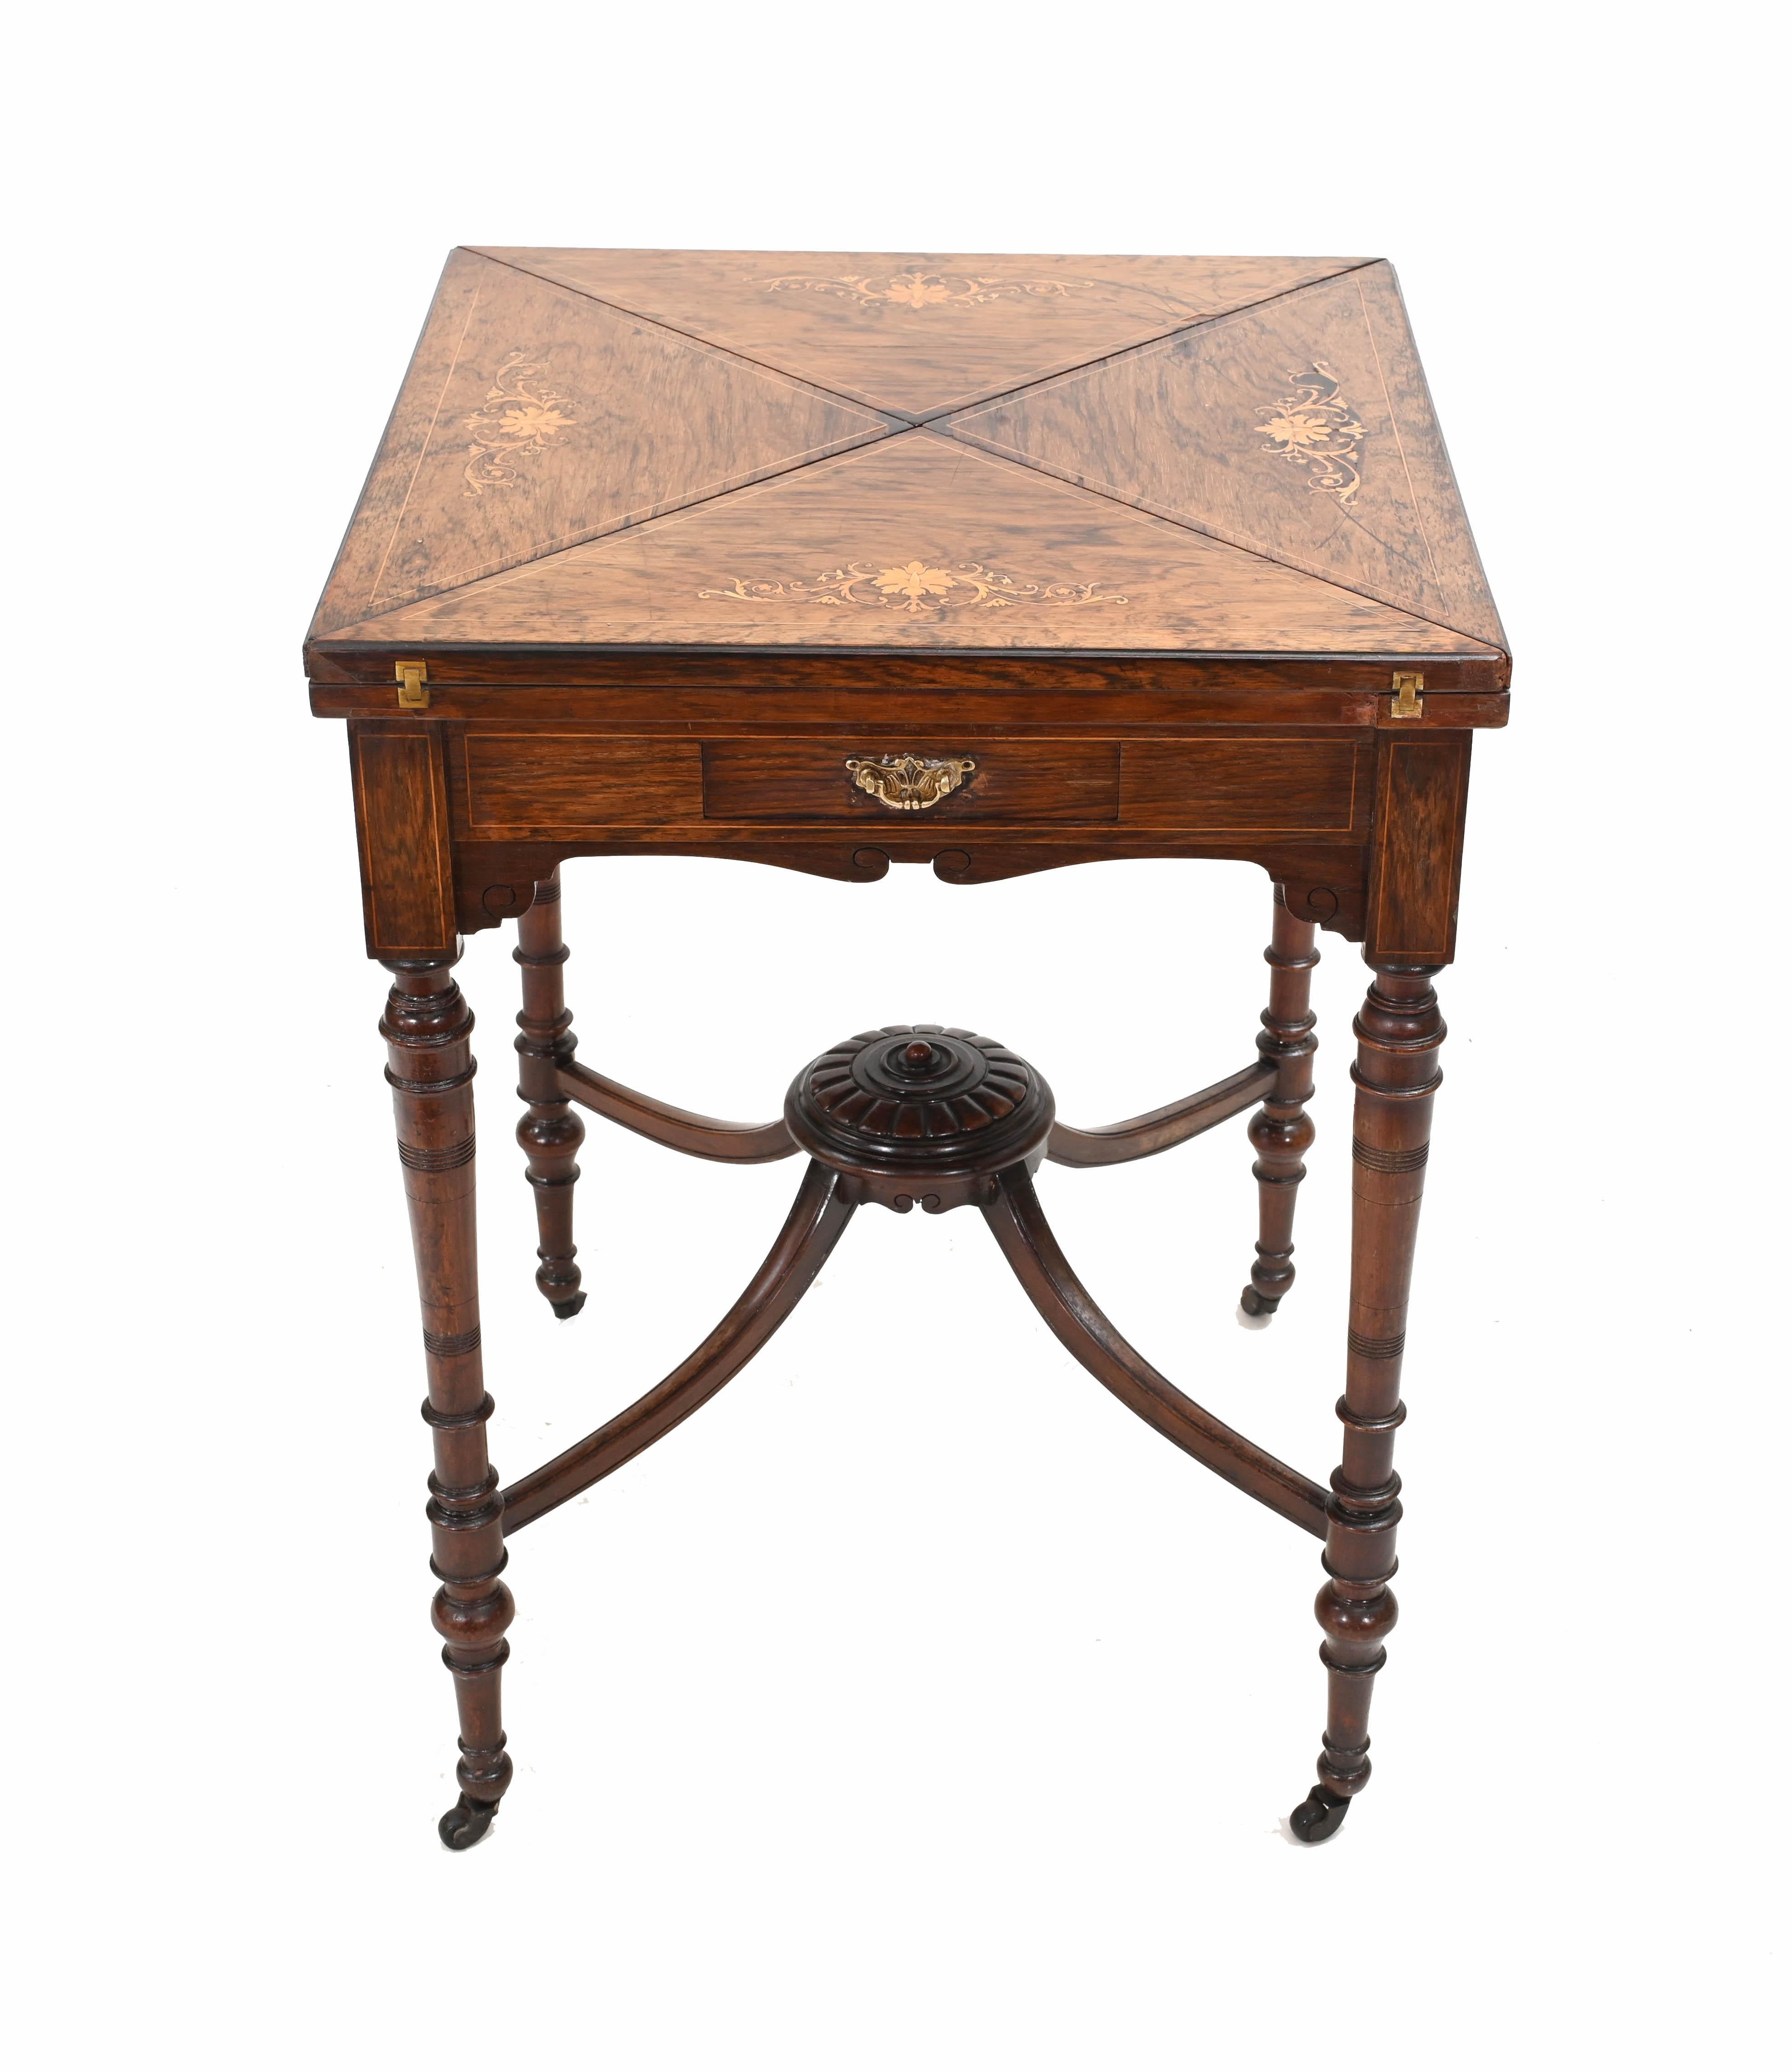 Refined Edwardian games table
Also called an envelope table due to the manner in which it opens out
Hand crafted from rosewood with intricate inlay work
Opens out to reveal game playing surface 
Circa 1910
Some of our items are in storage so